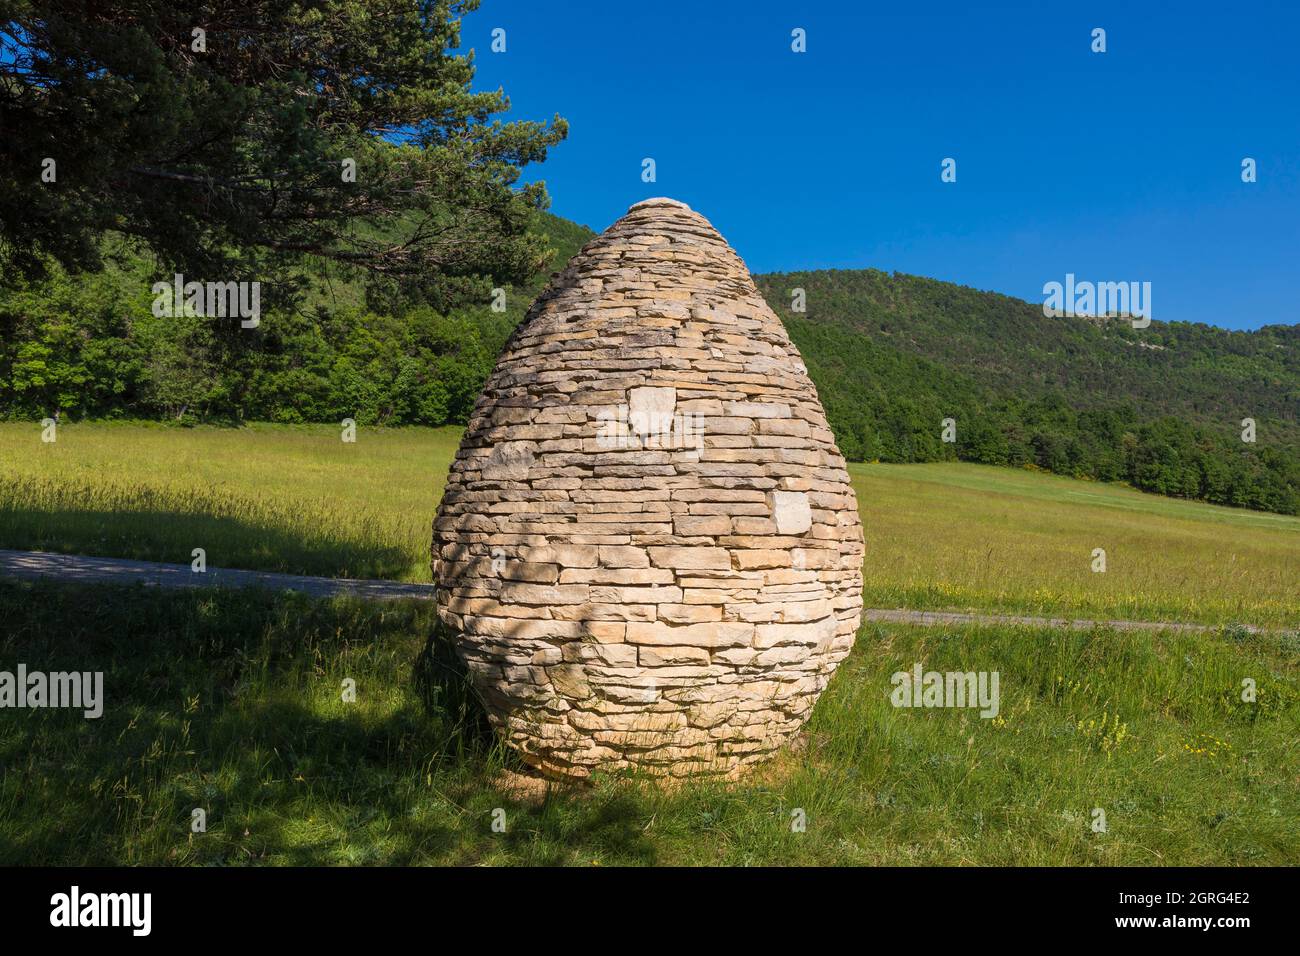 France, Alpes-de-Haute-Provence, Geological Nature Reserve of Haute Provence, Asse valley, Tartonne, Sentinelle, dry stone cairn, artwork by land art artist Andy Goldsworthy Stock Photo